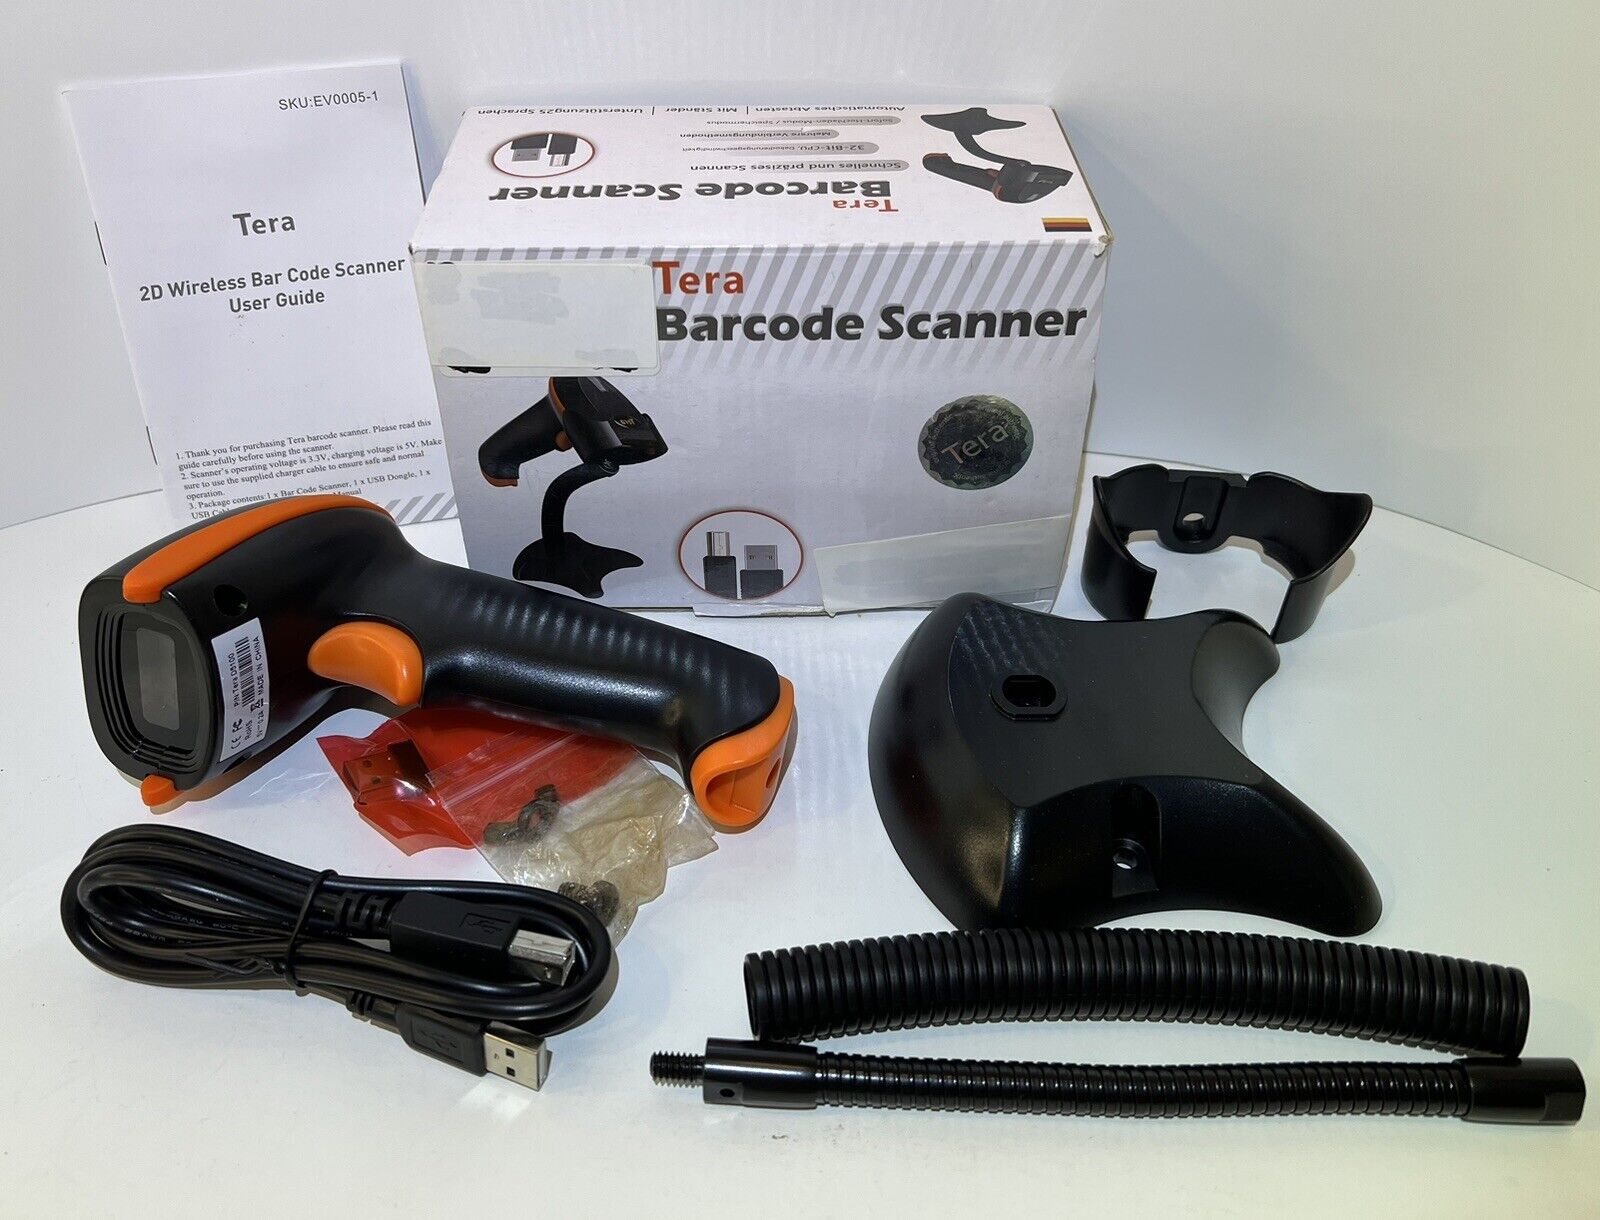 How To Set Up Tera Barcode Scanner